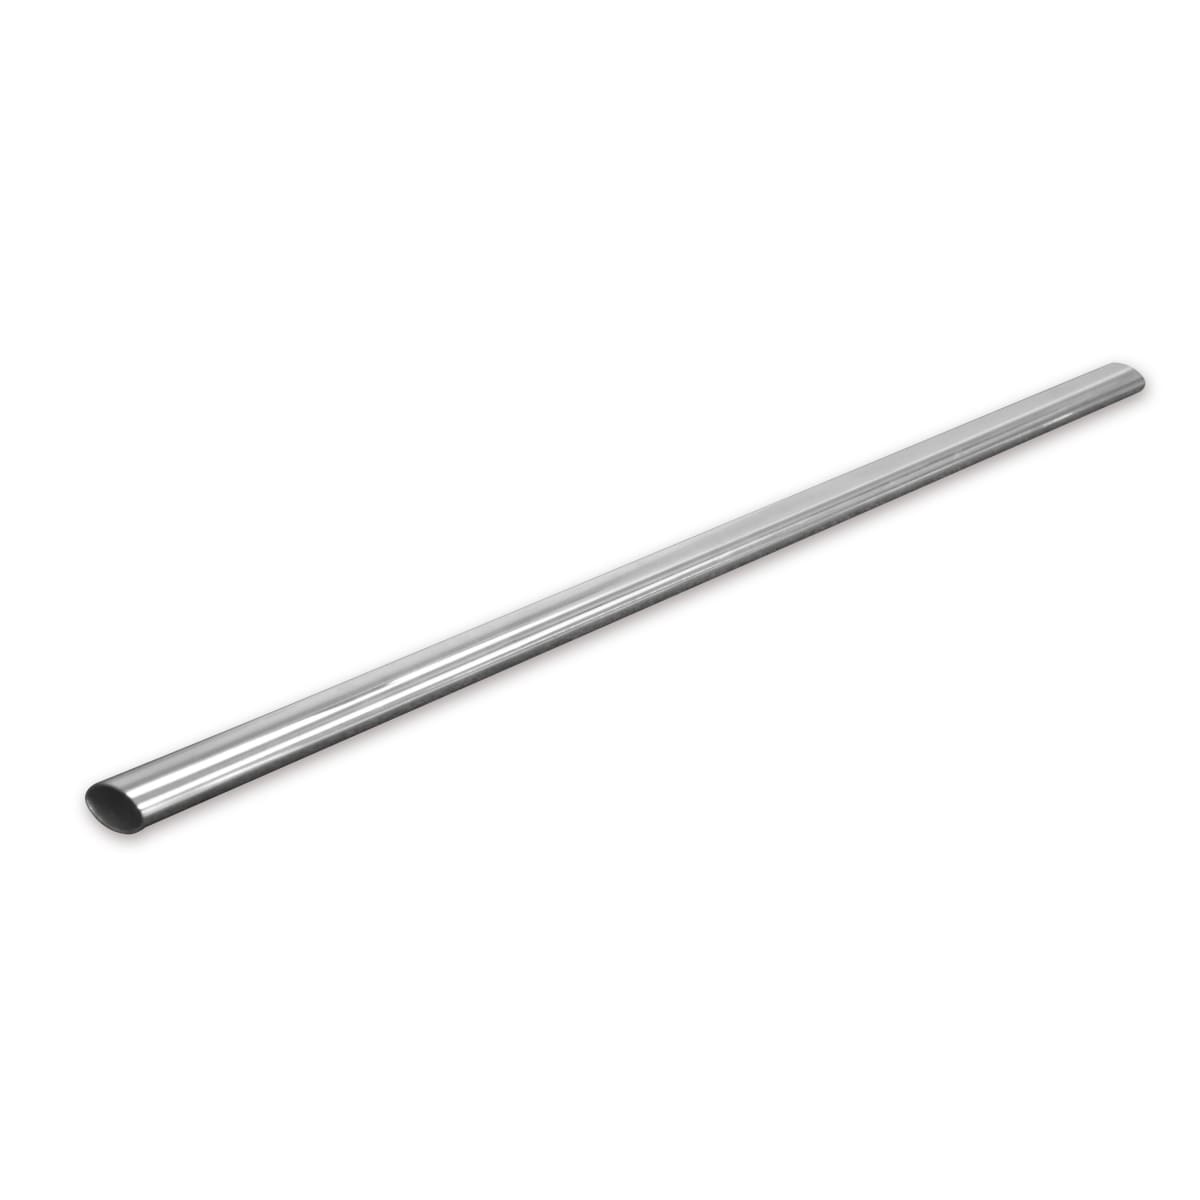 OVAL CUPBOARD TUBE 35X20MM L 80 CM CHROME SPACEO